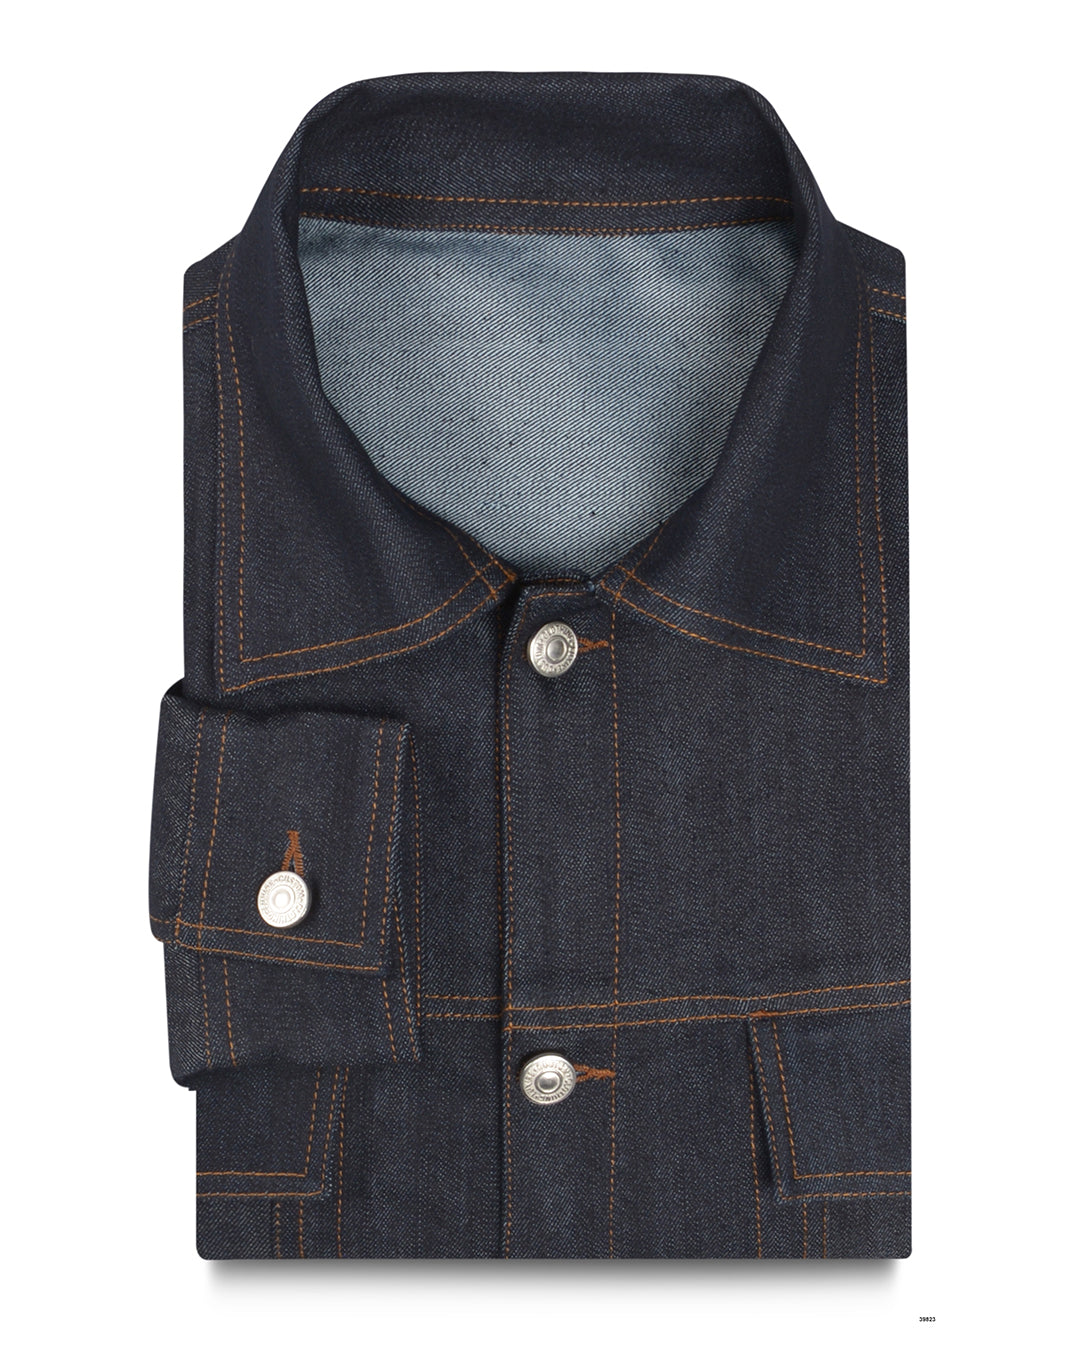 Collar and cuff of the denim jacket for men by Luxire in midnight blue